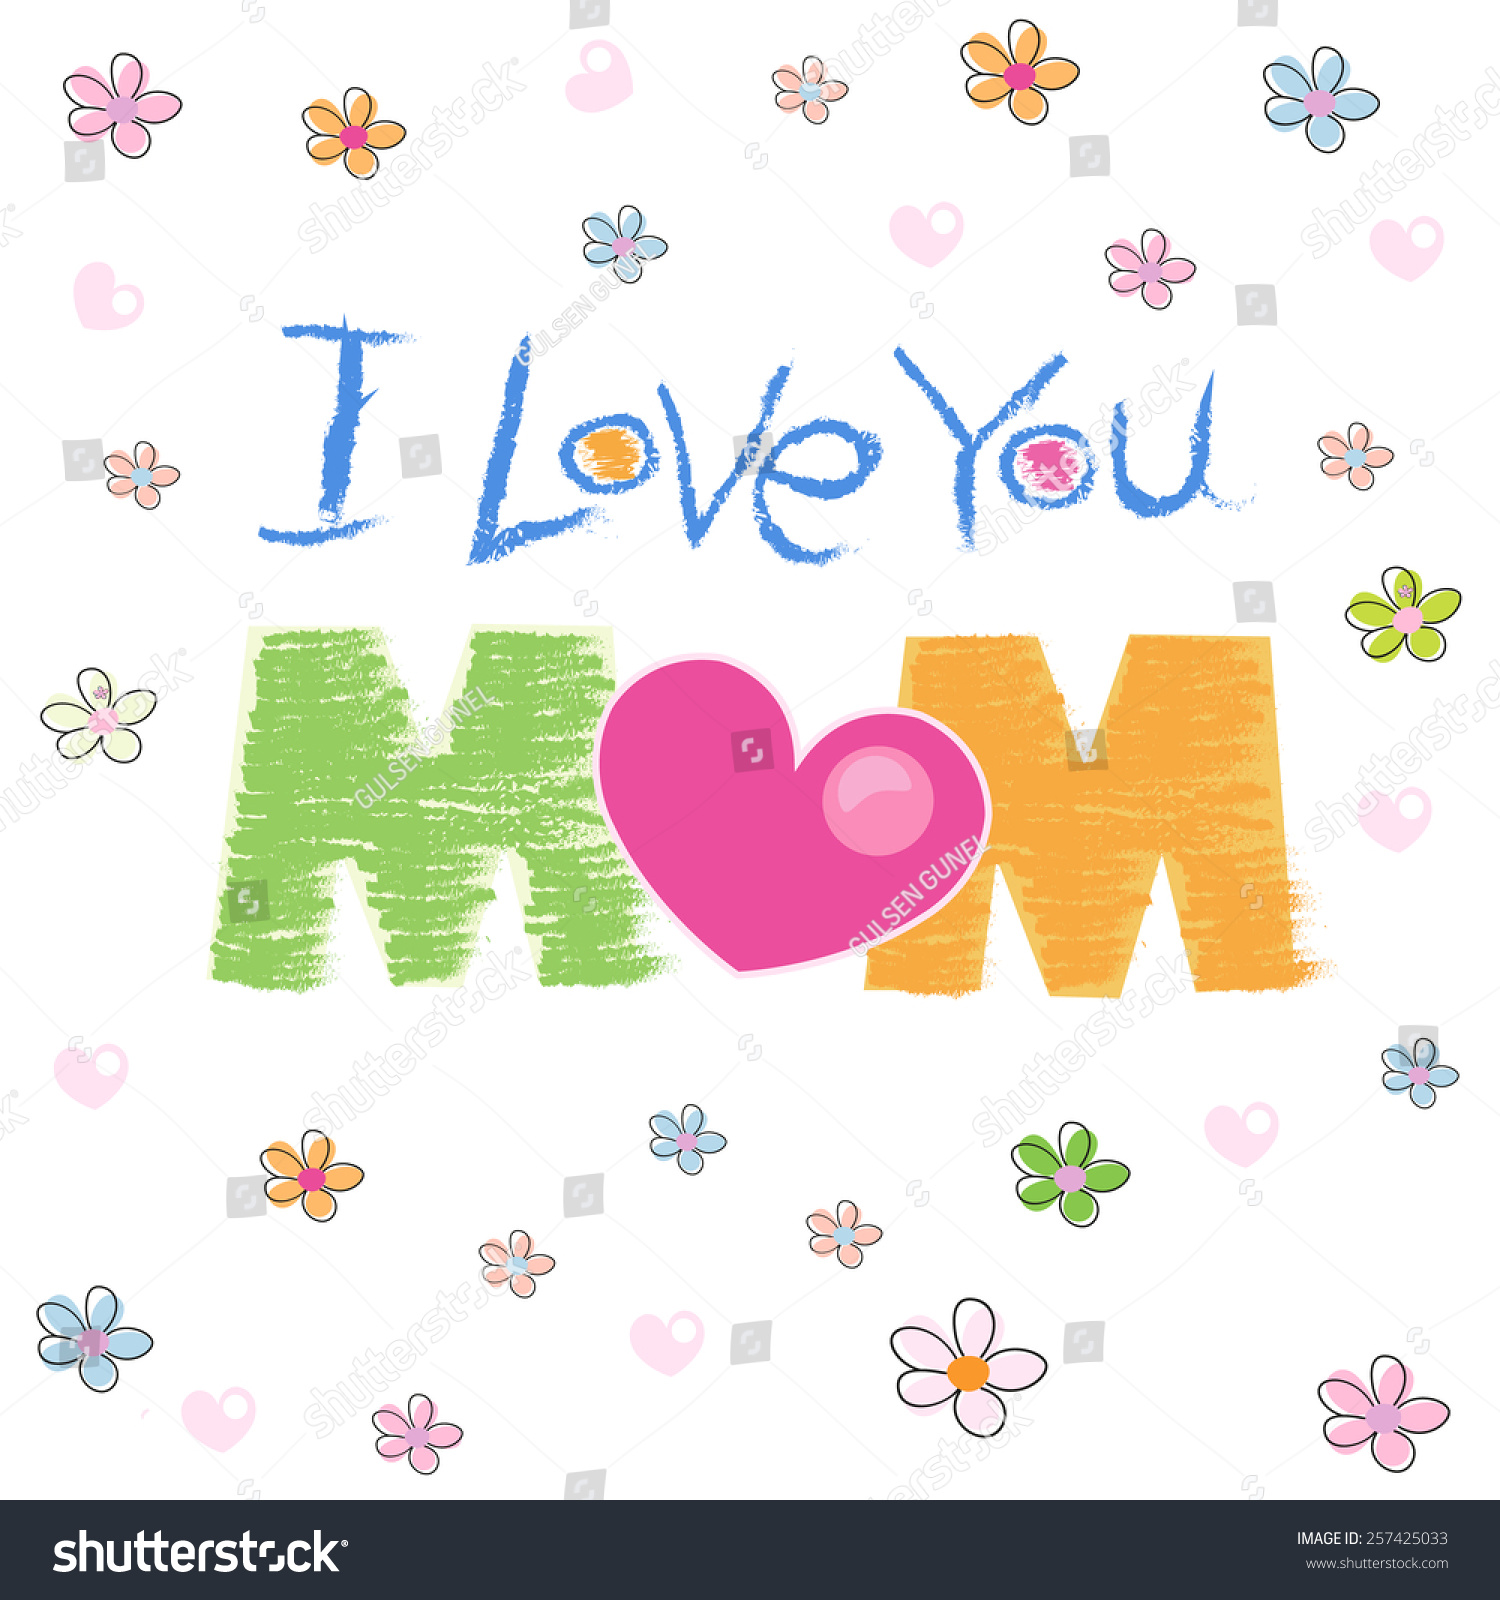 I Love You Mom Greeting Card Hand Drawing Illustration - 257425033 ...